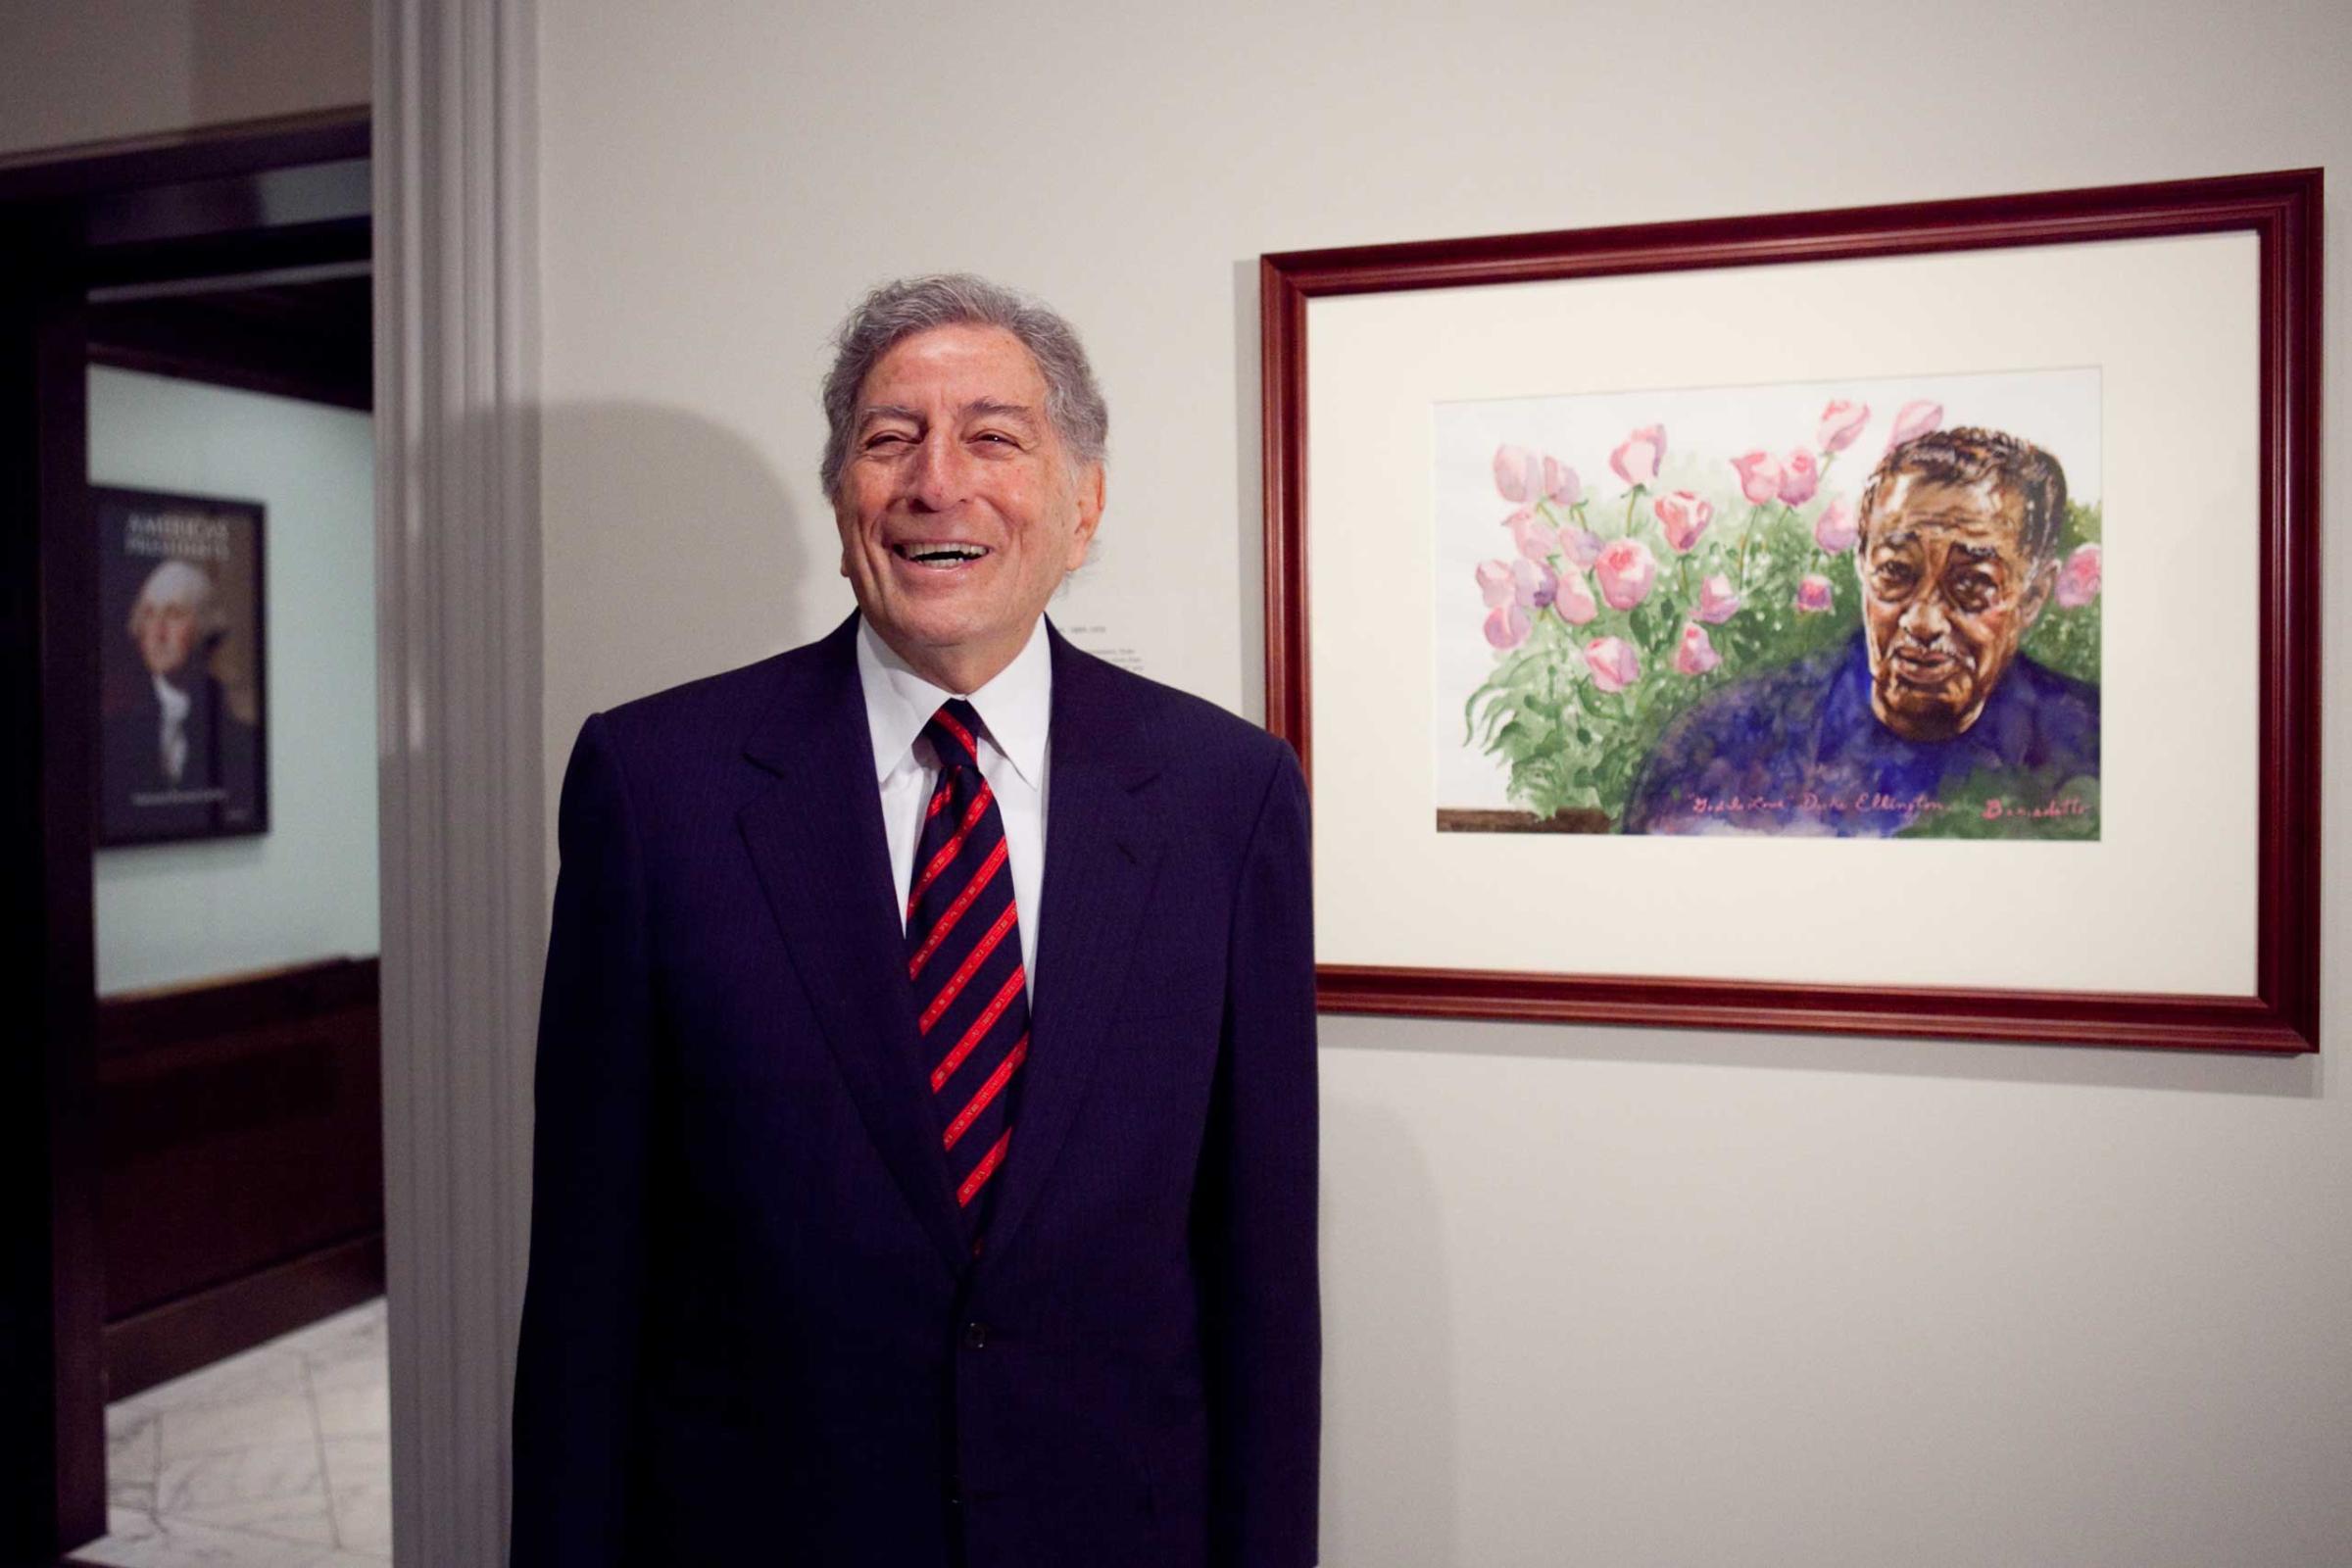 Tony Bennett Presents A Painting To The National Portrait Gallery